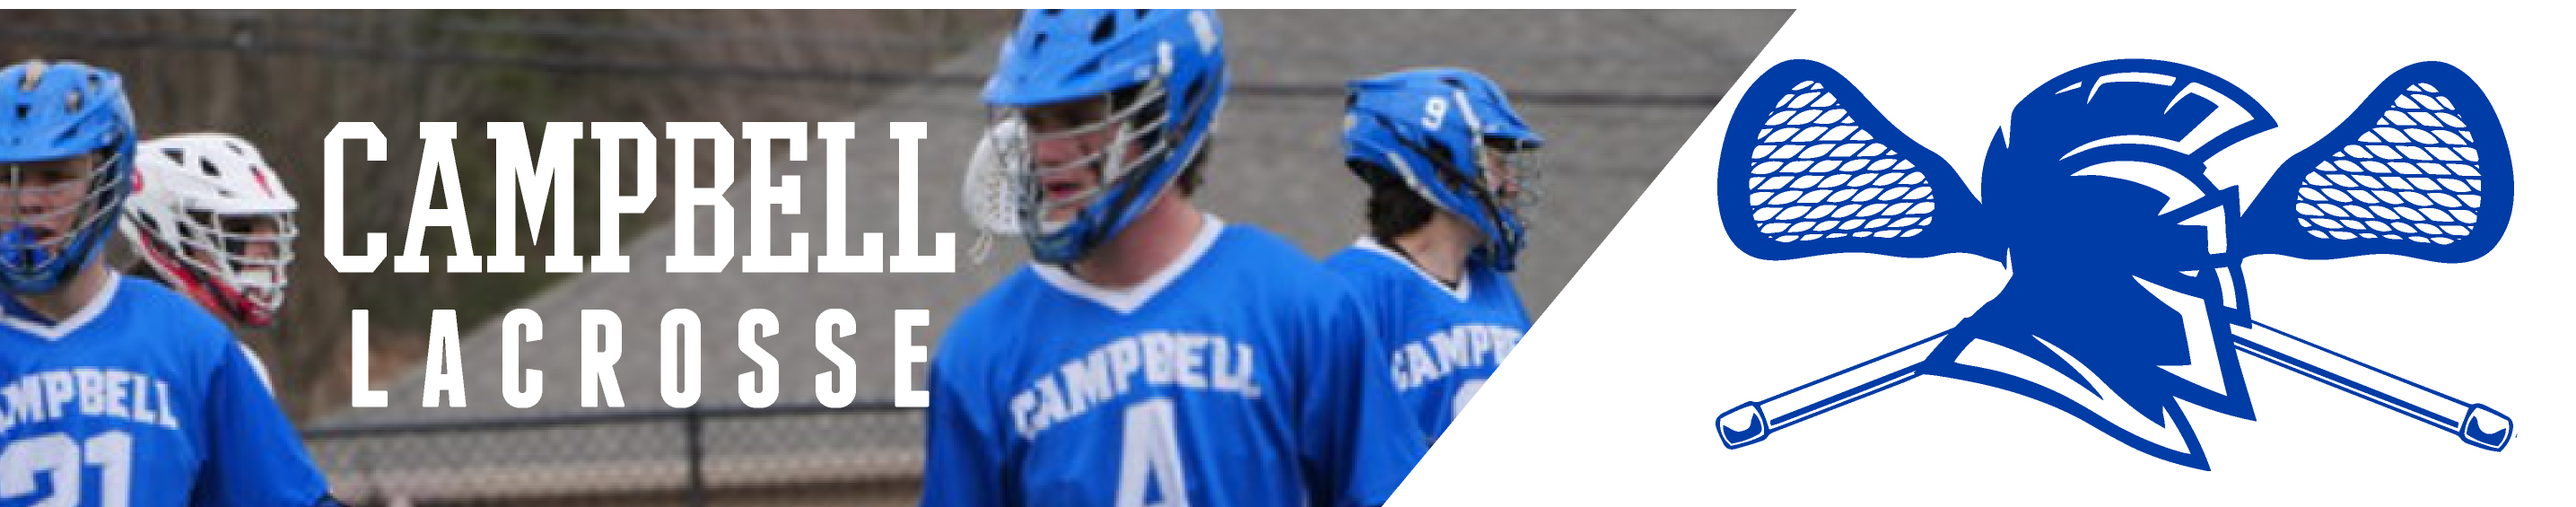 Campbell Lacrosse